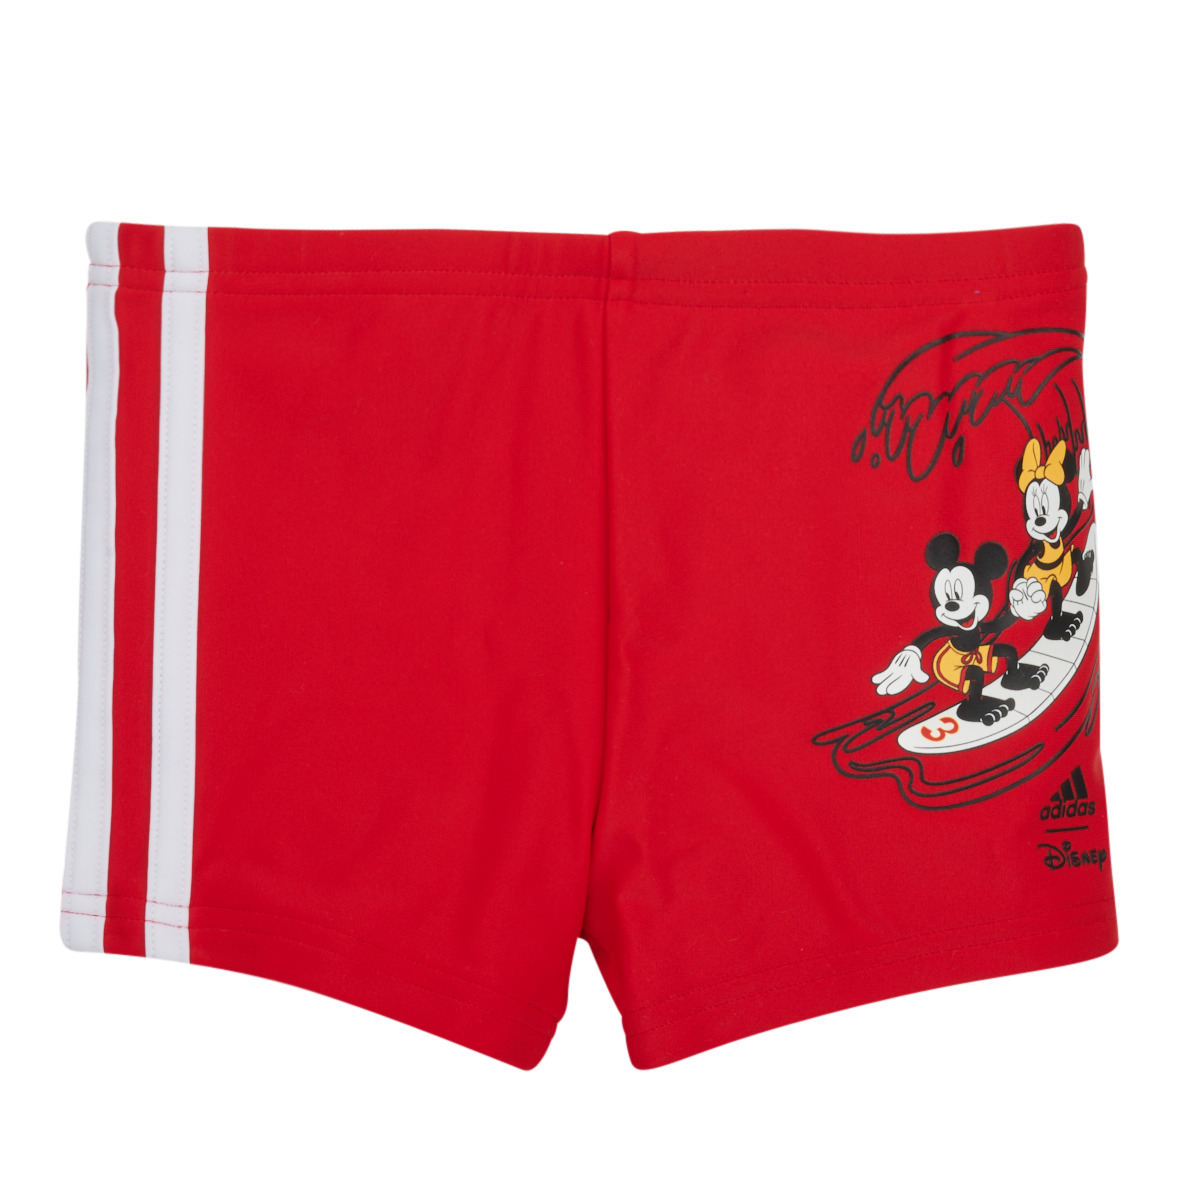 adidas Performance Rouge DY MM BOXER bBEiOd8s